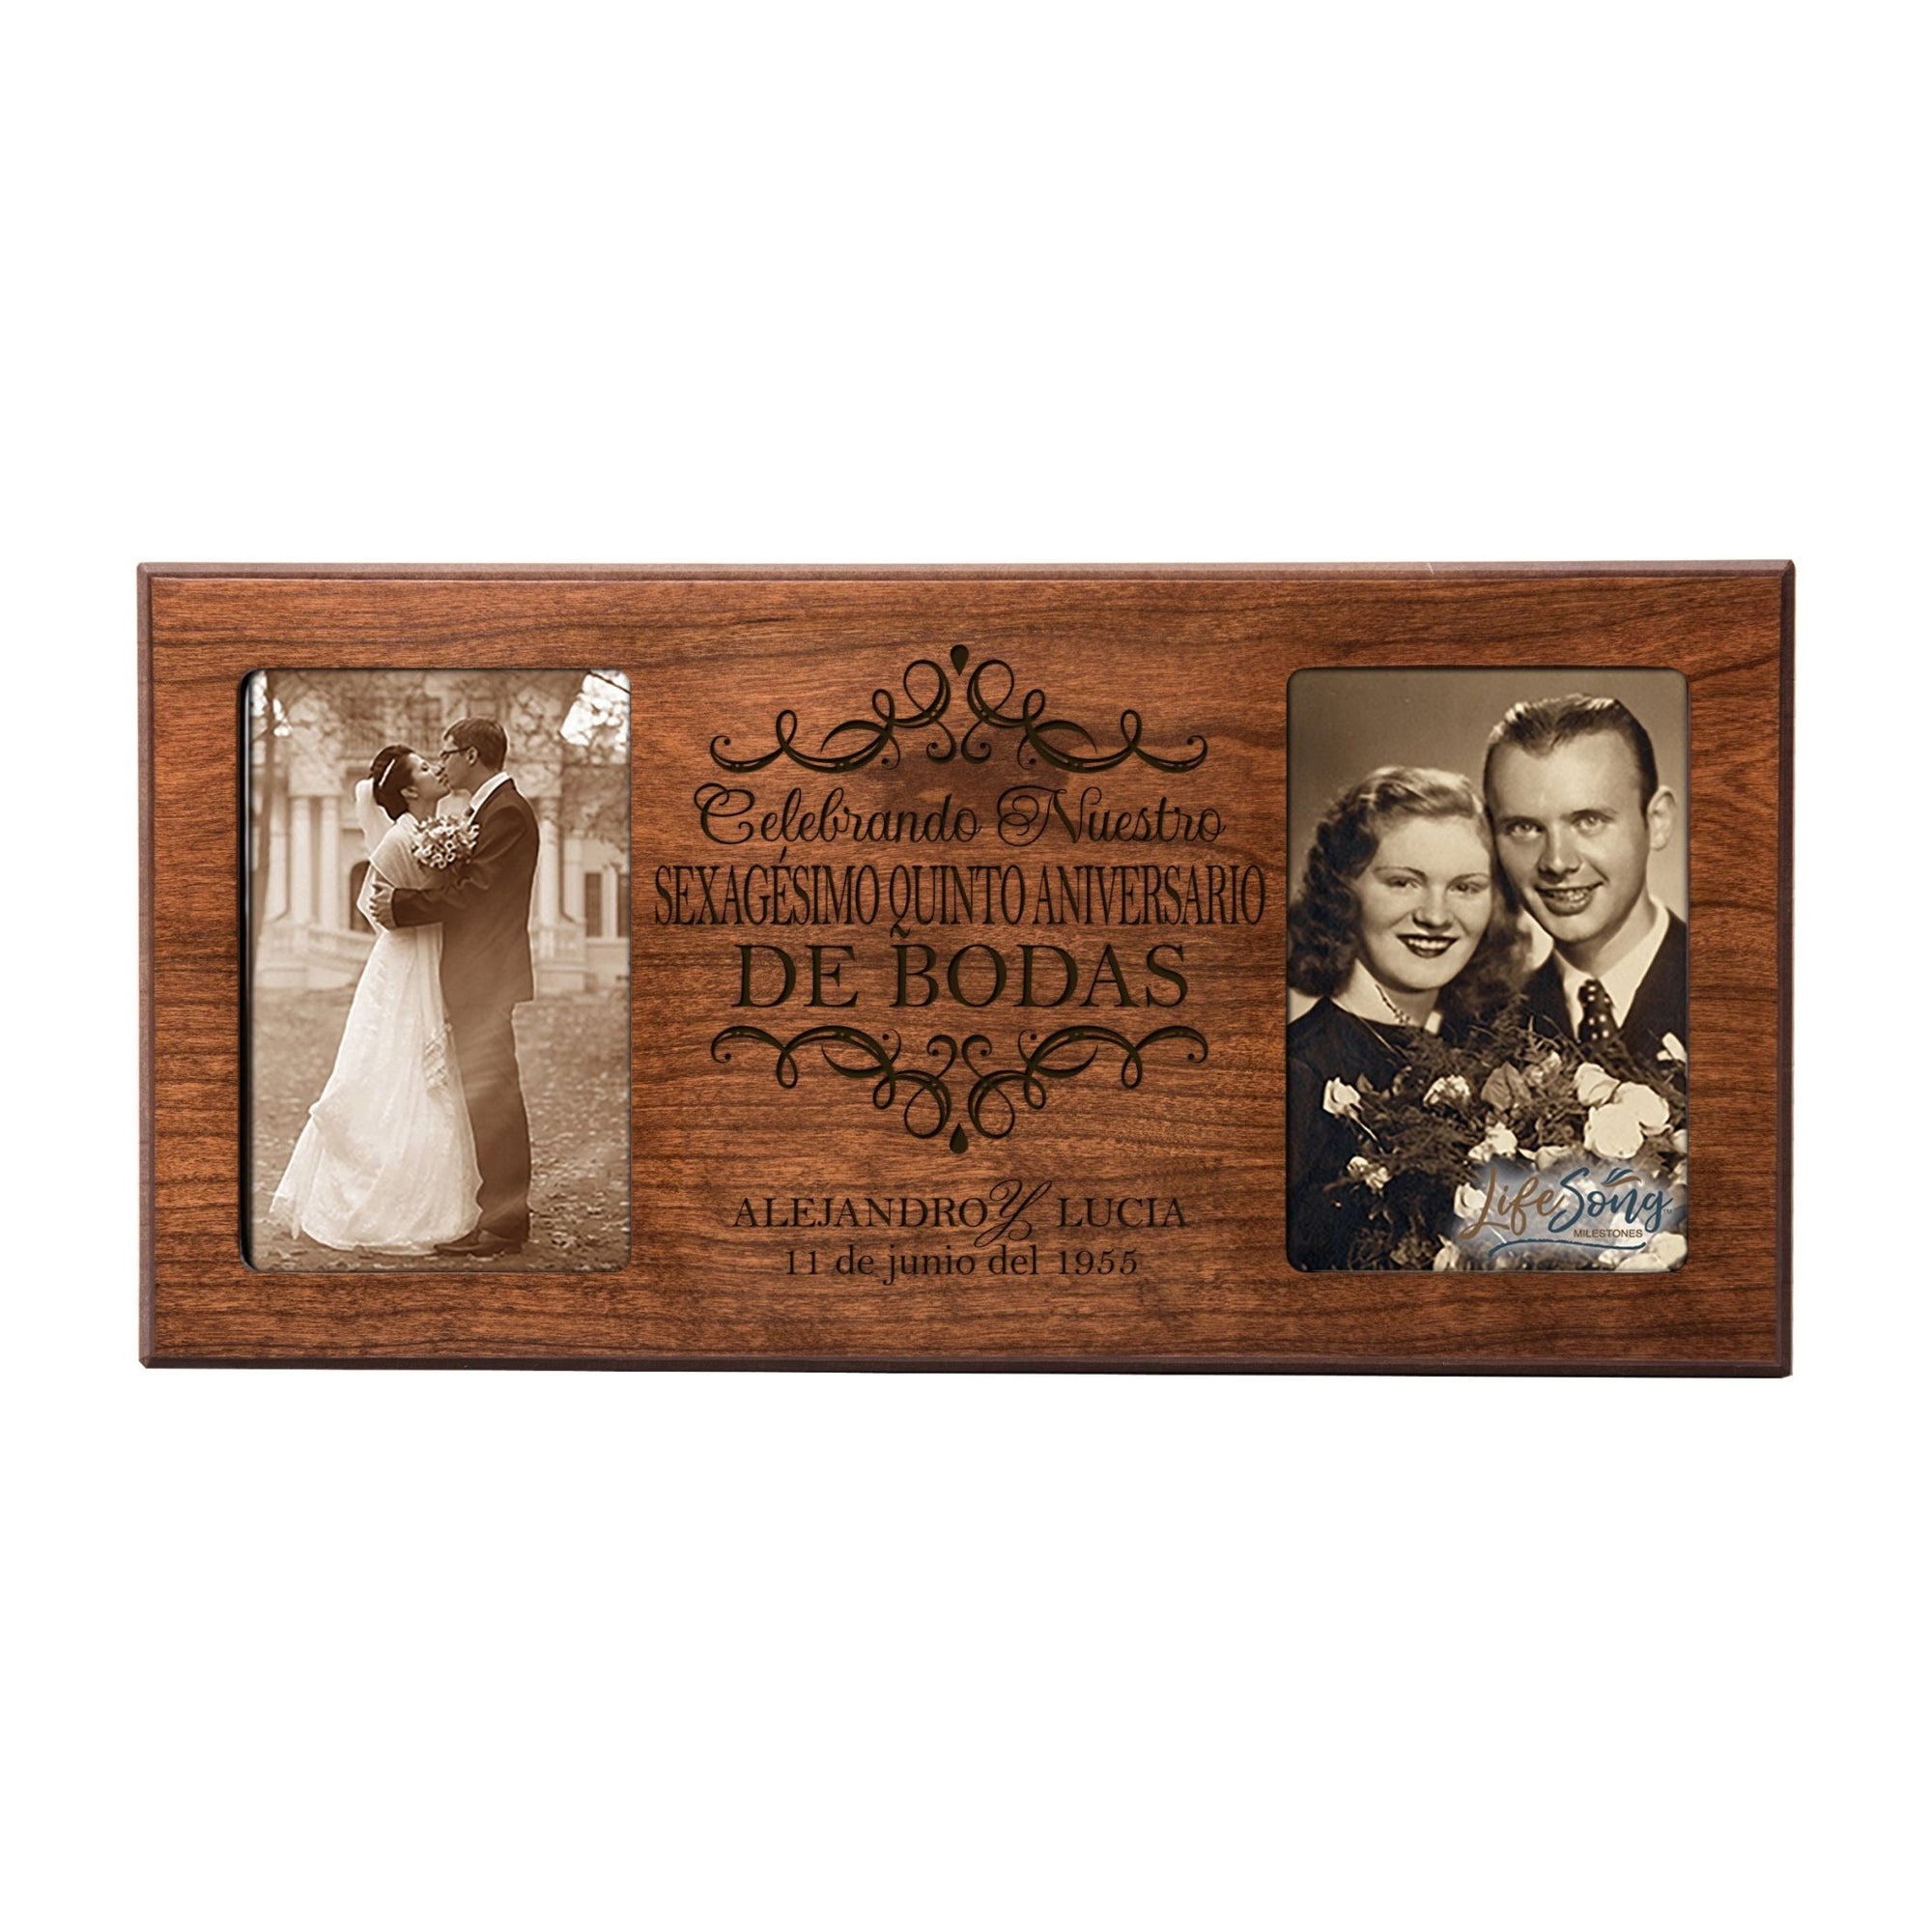 Personalized Picture Frame 65th Wedding Anniversary Spanish Gift Ideas